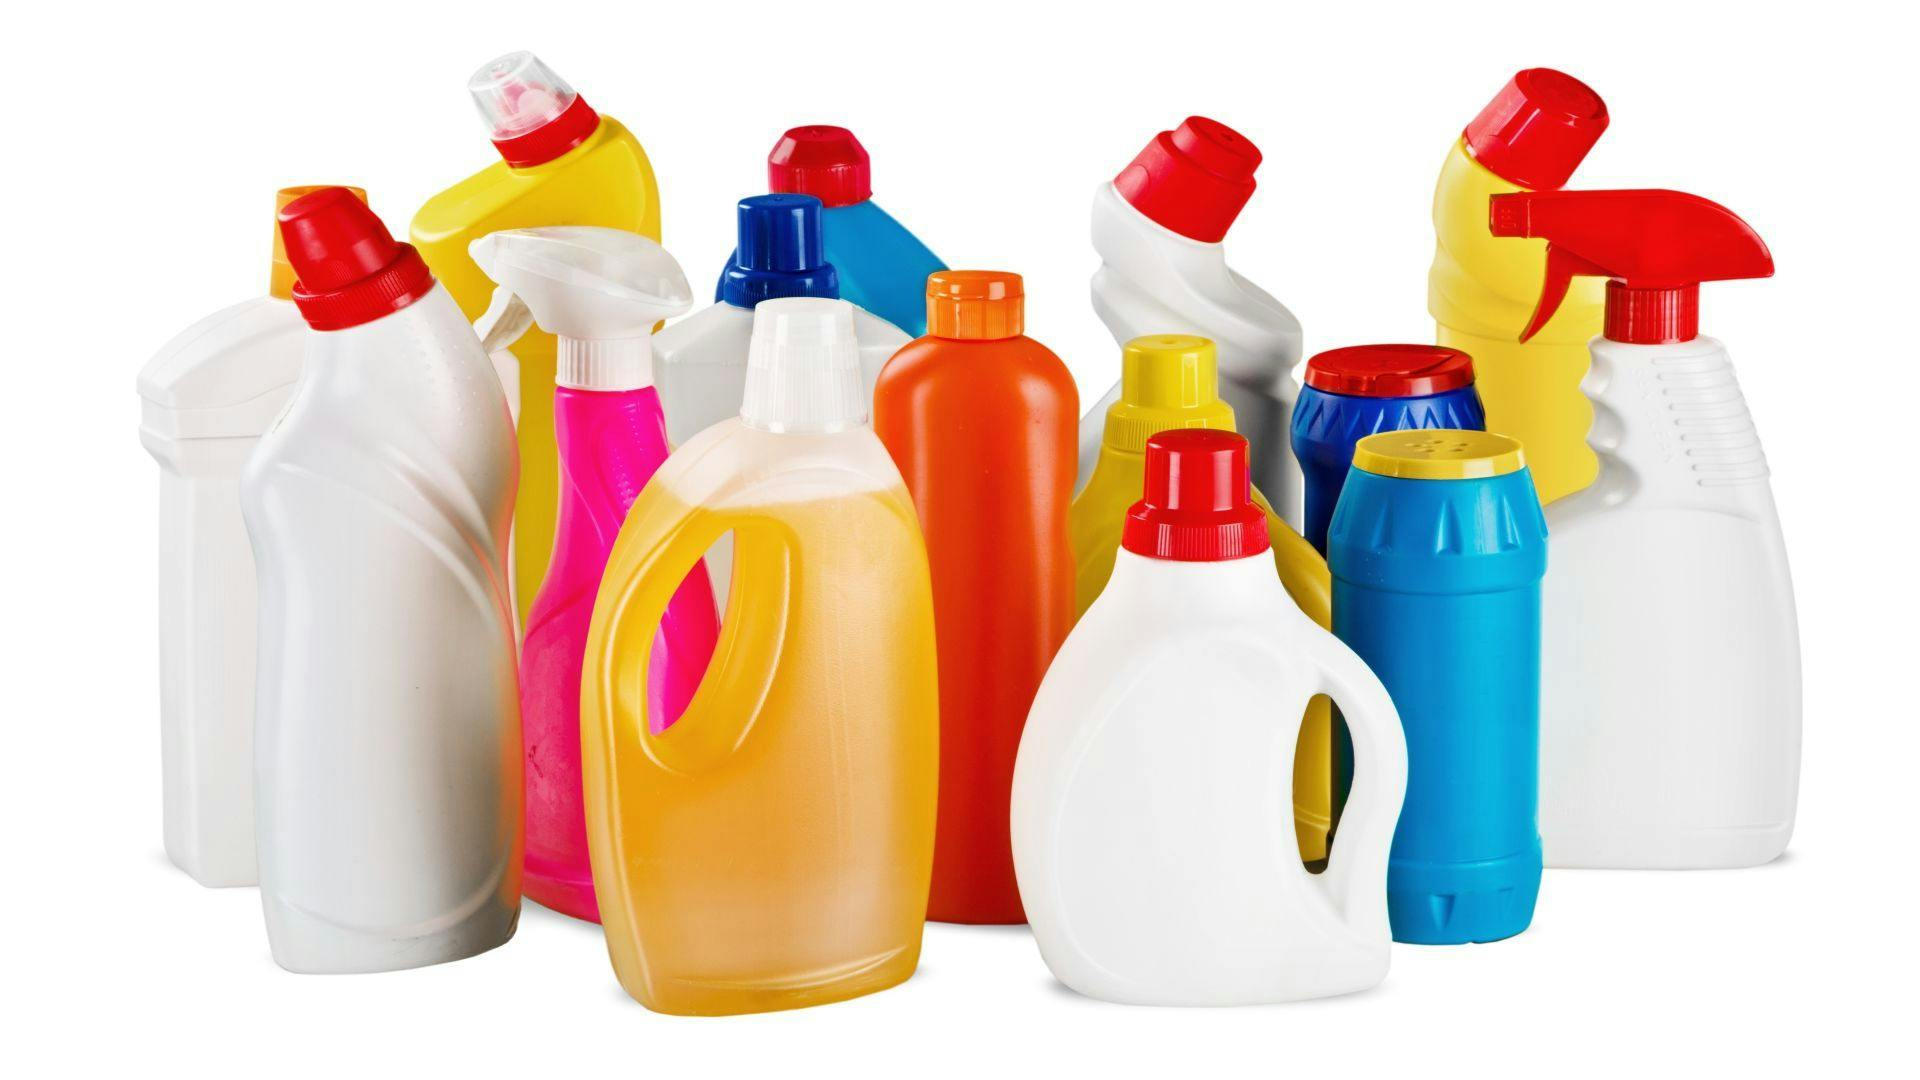 Product Evaluation and Purchasing: Environmental Hygiene-Related Products